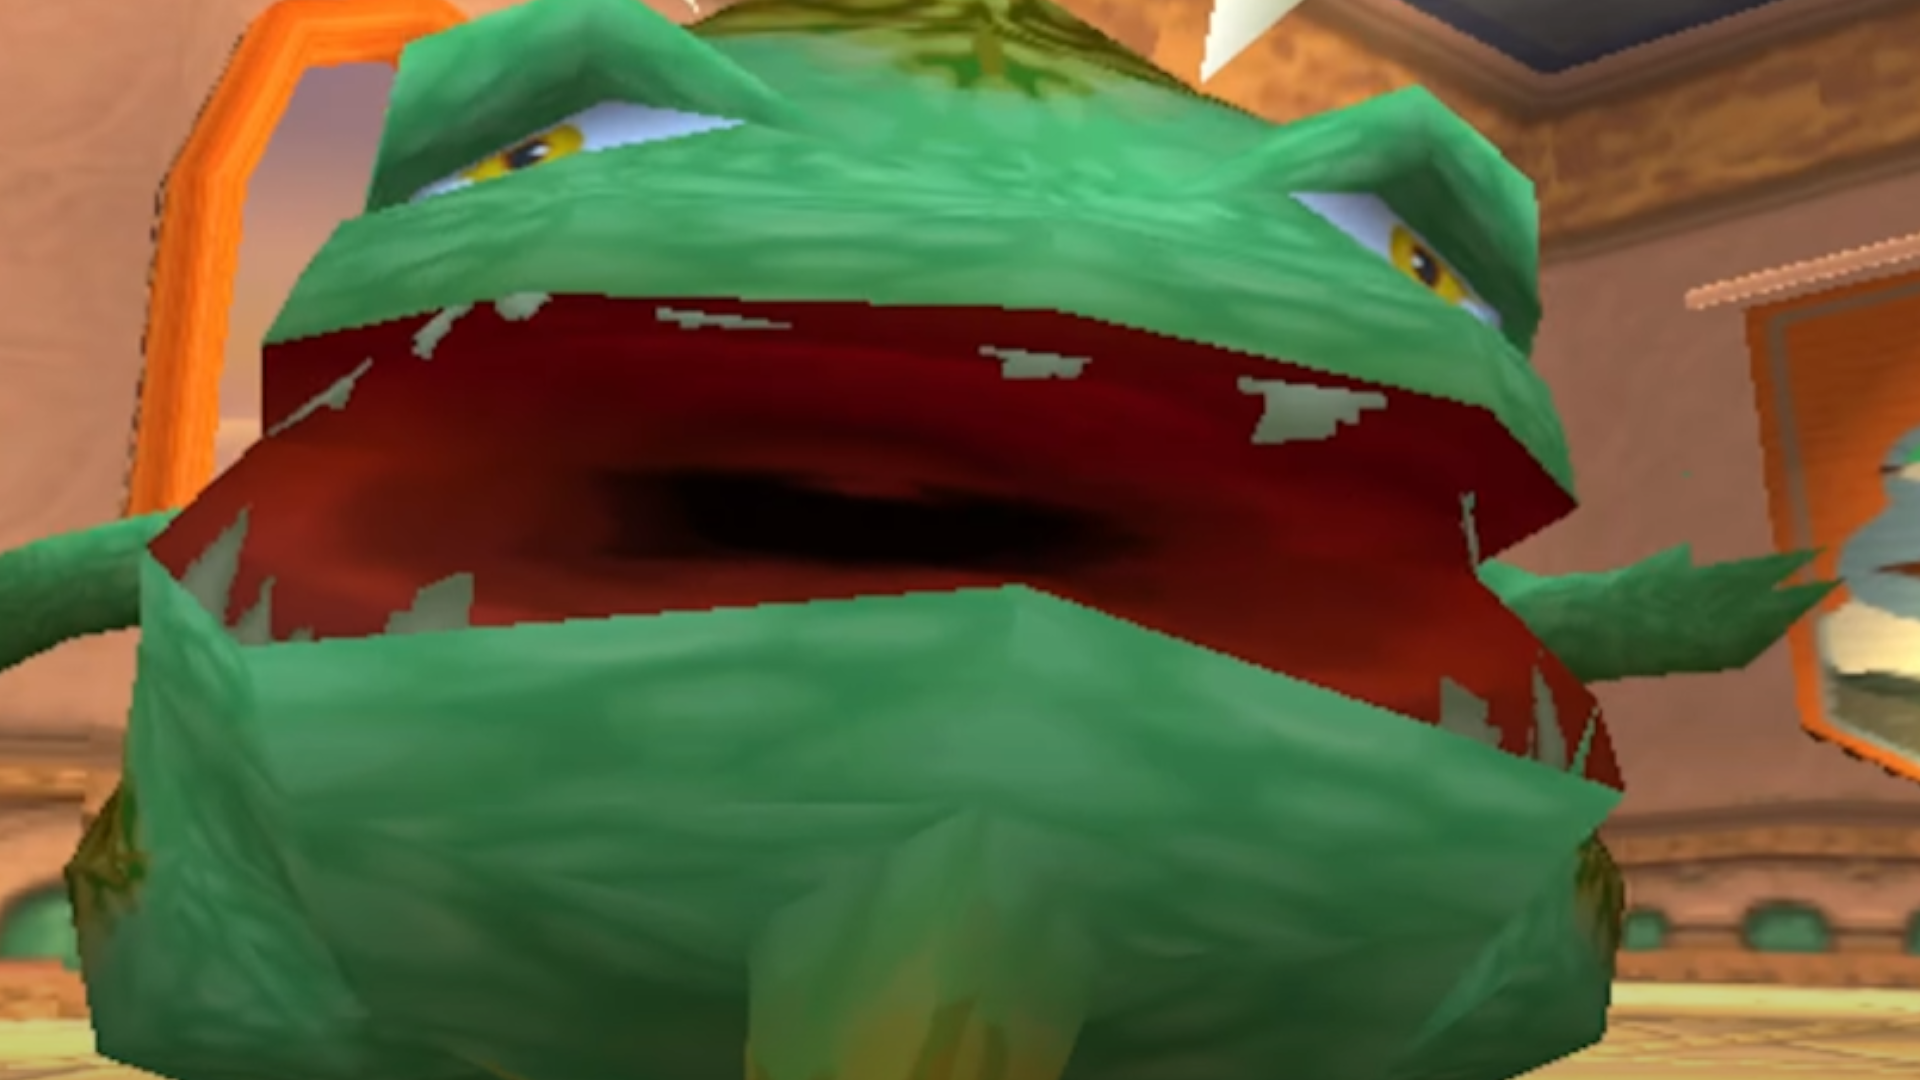 An image of Buzz, a cursed frog rabbit creature, with his rows of sharp teeth on display.